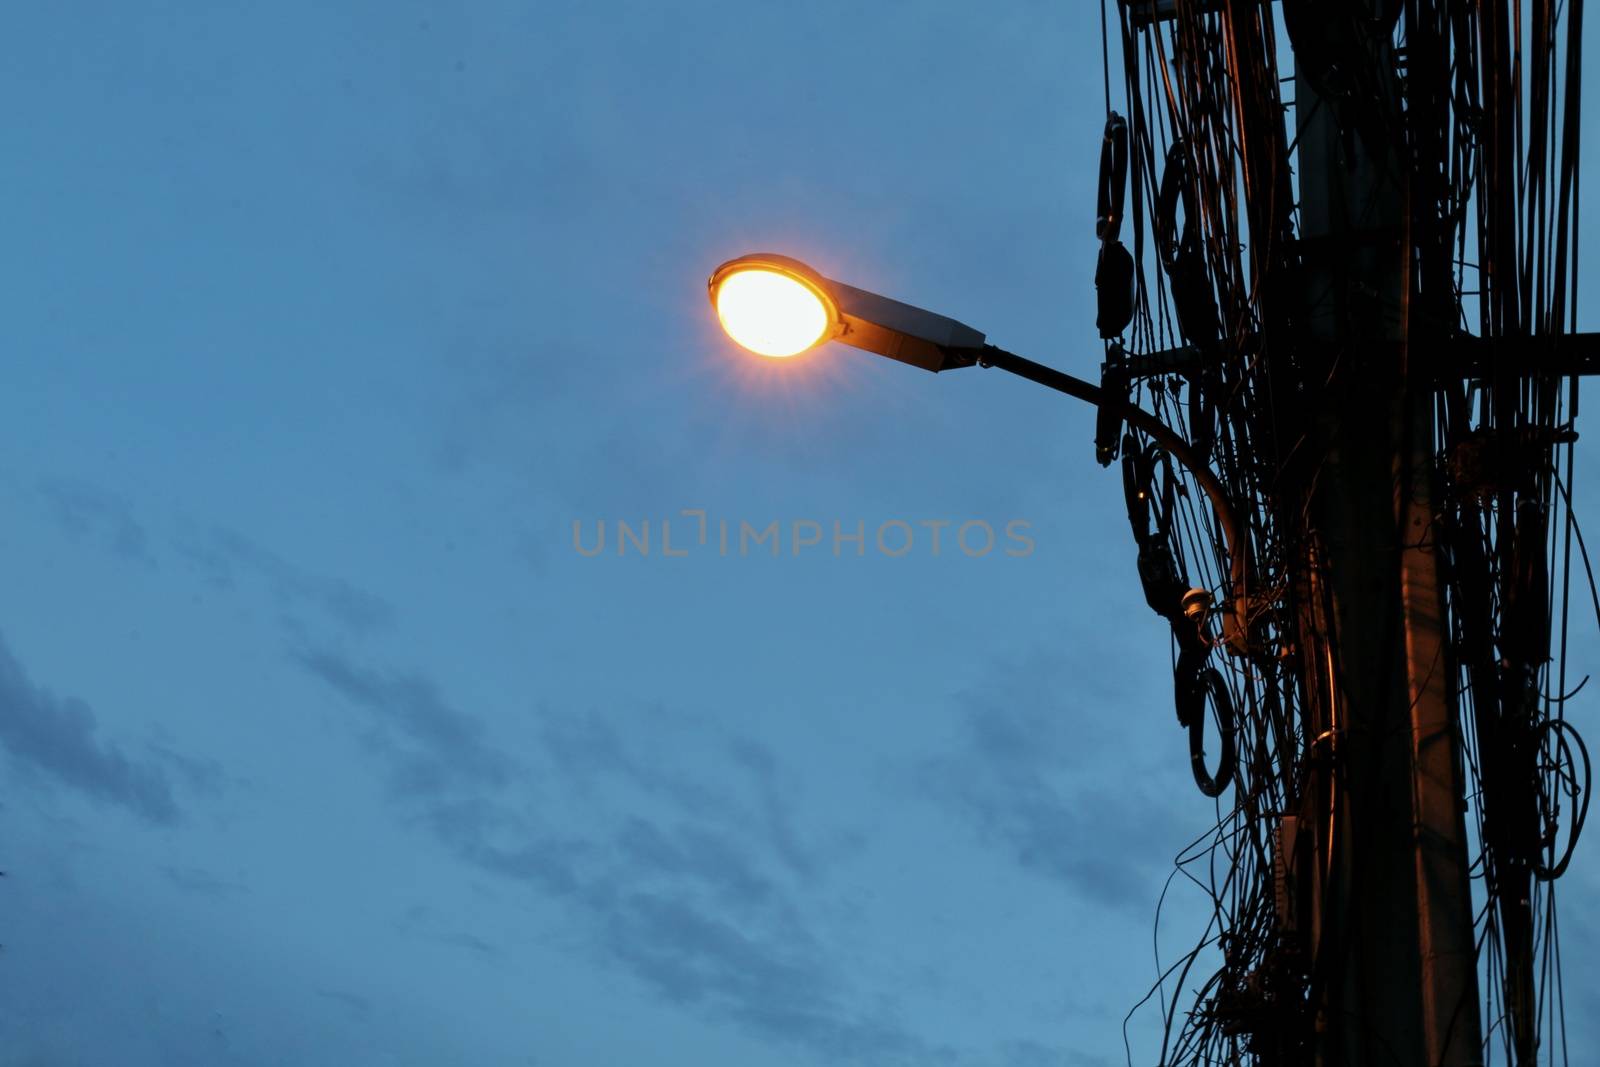 Street lights mounted on poles at evening time